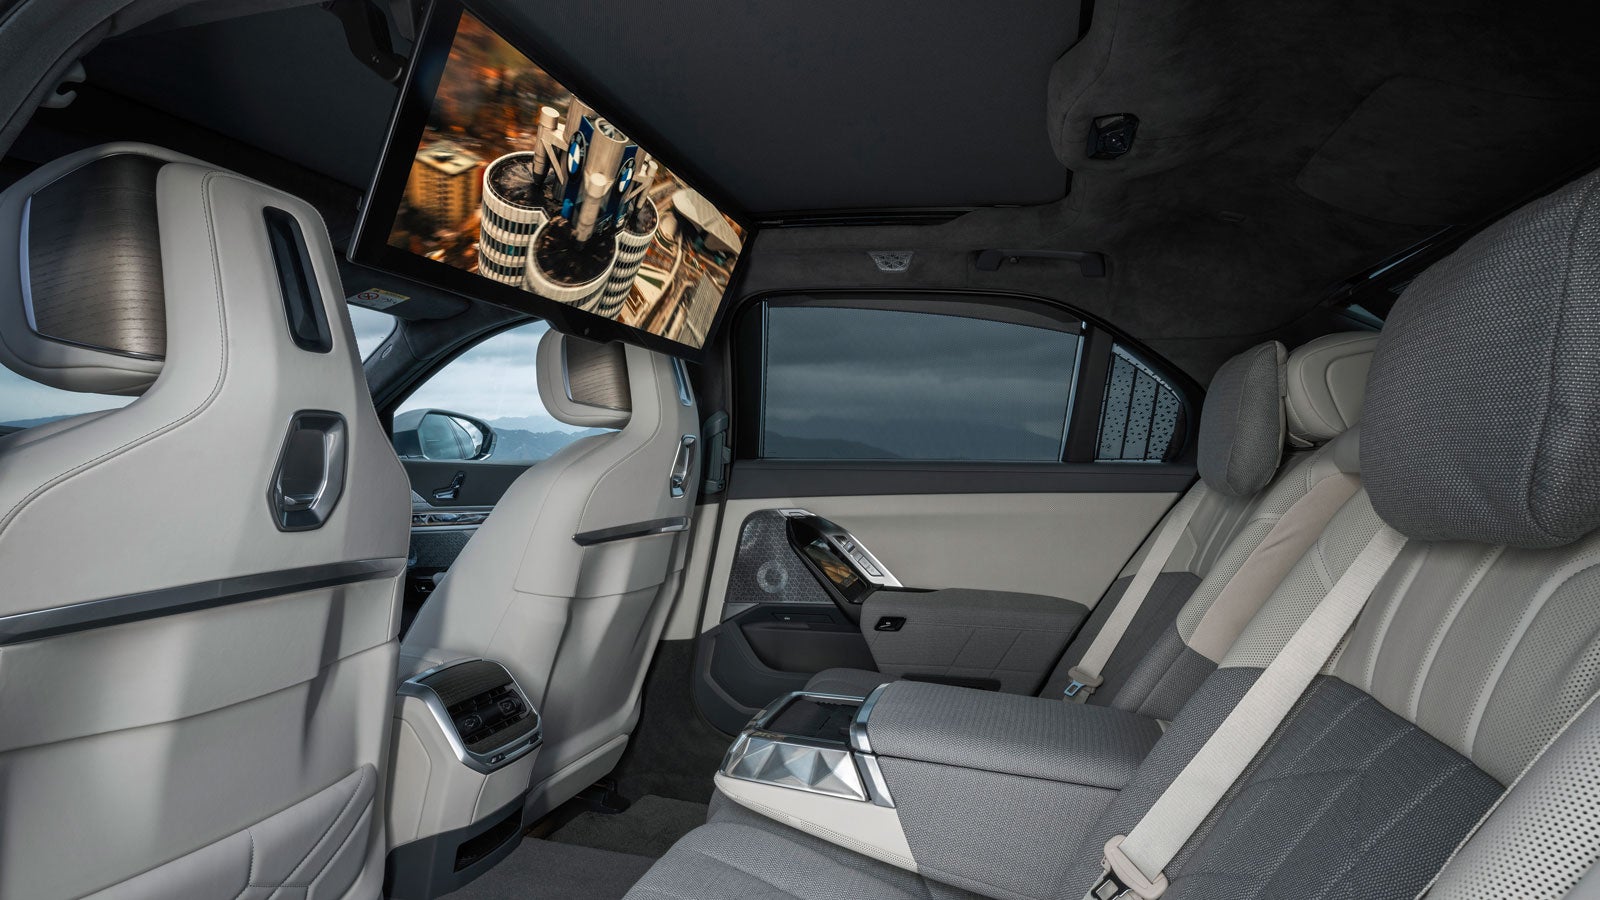 BMW’s Enormous New Theater Screen Blocks Your Rear View